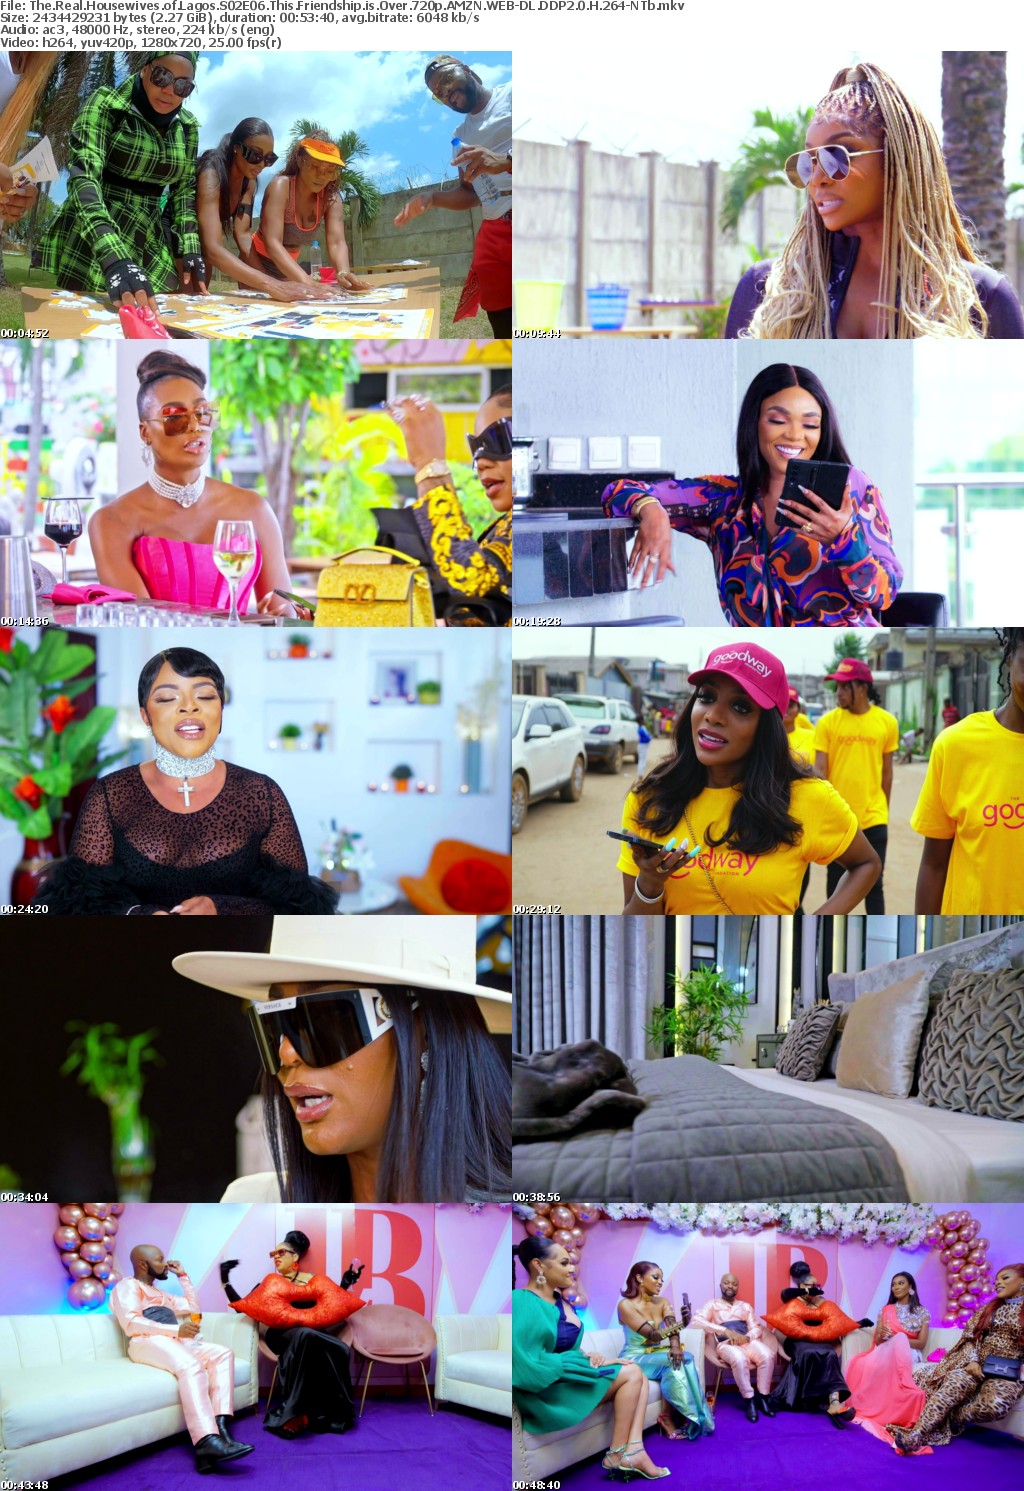 The Real Housewives of Lagos S02E06 This Friendship is Over 720p AMZN WEB-DL DDP2 0 H 264-NTb